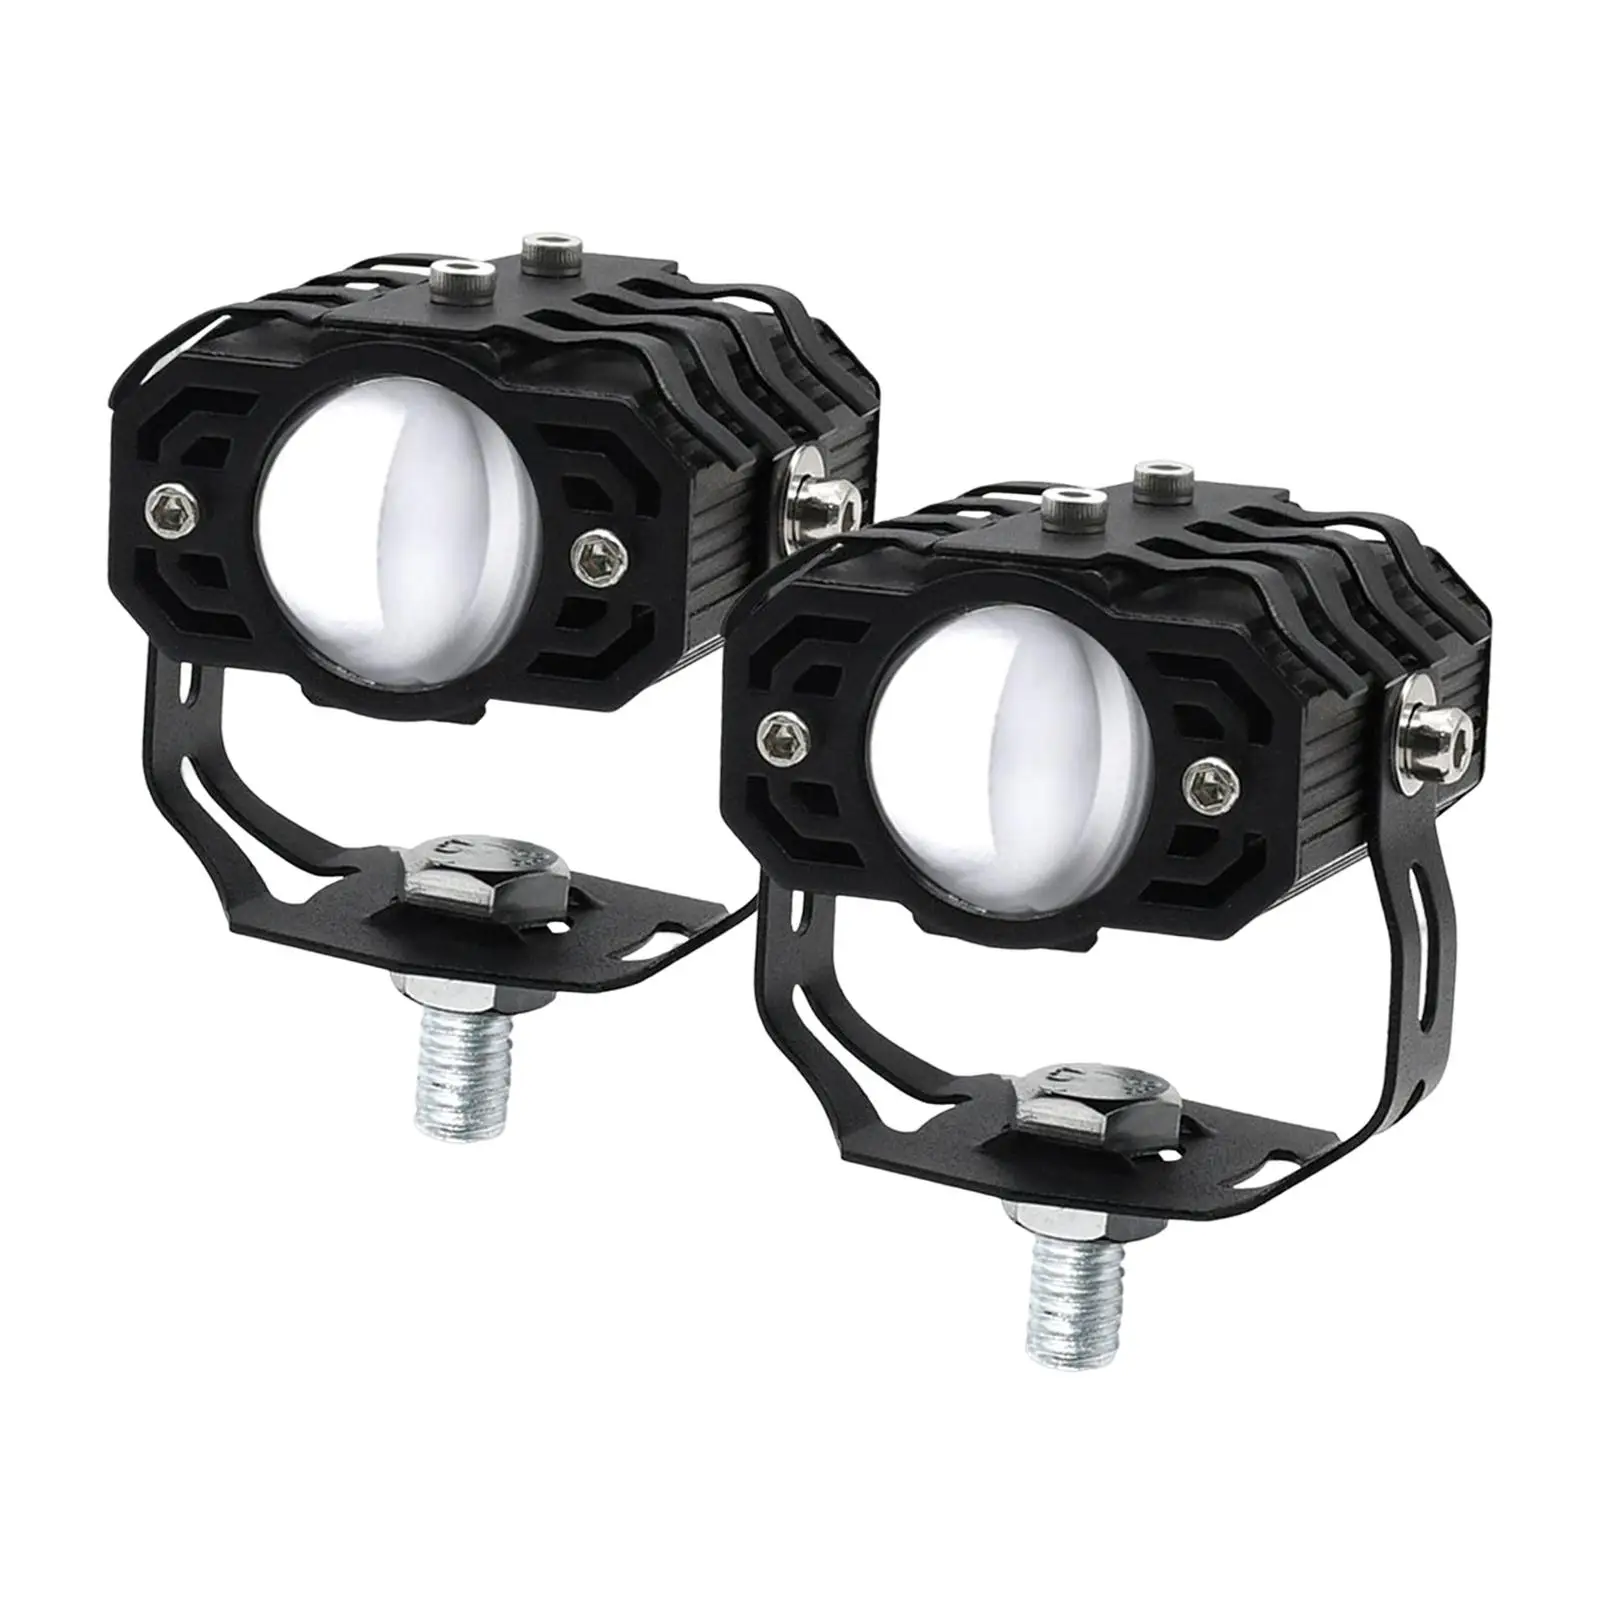 2Pcs Motorcycle Auxiliary Driving Lights Mini Spotlights Front for Boat